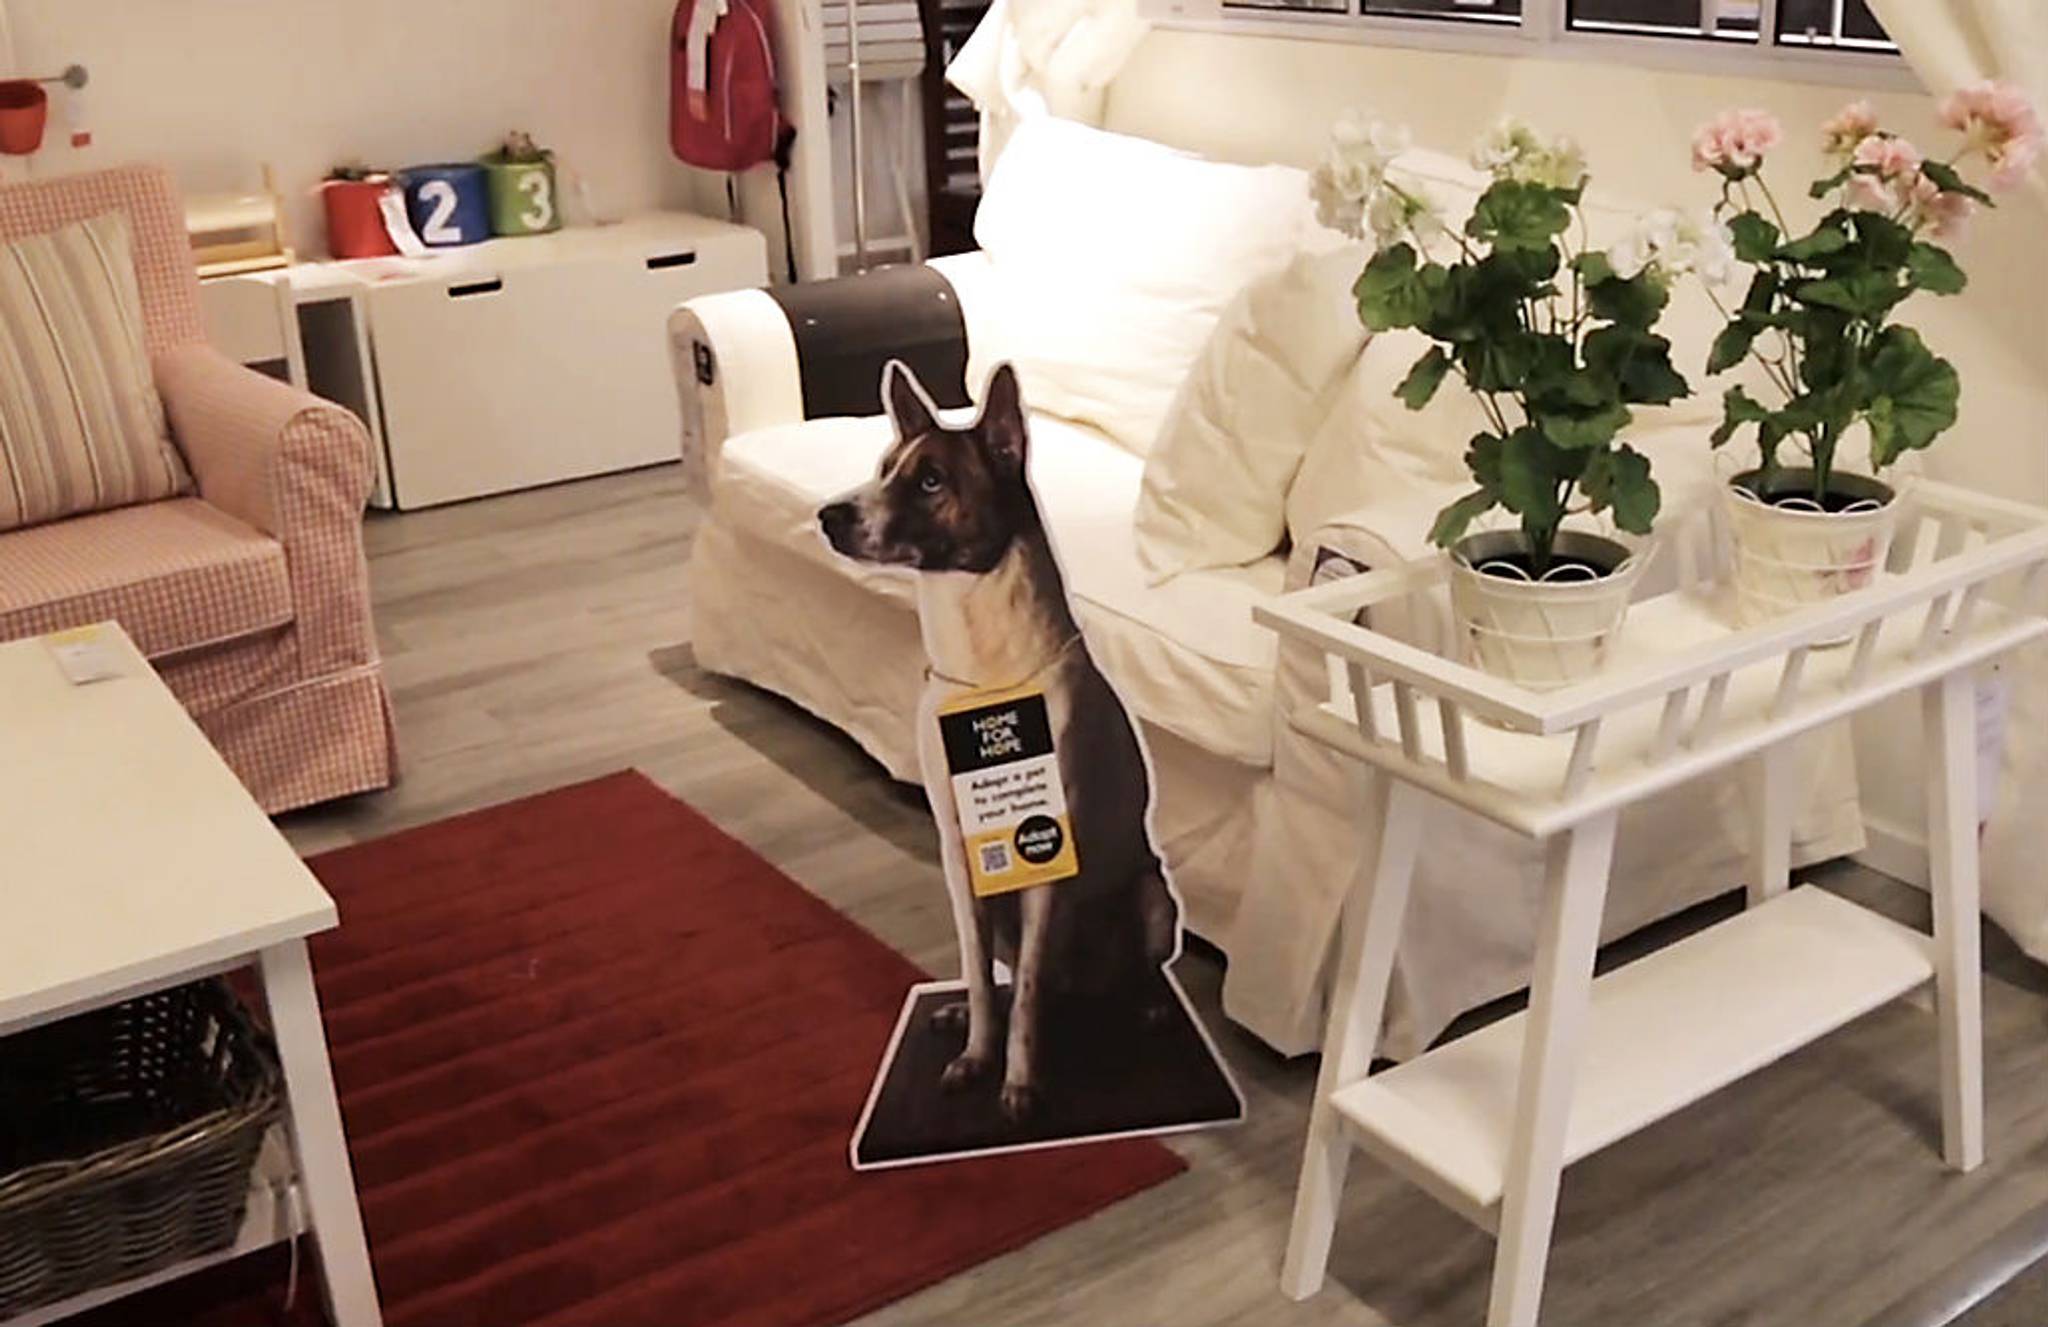 Man's best friend now comes with your sofa